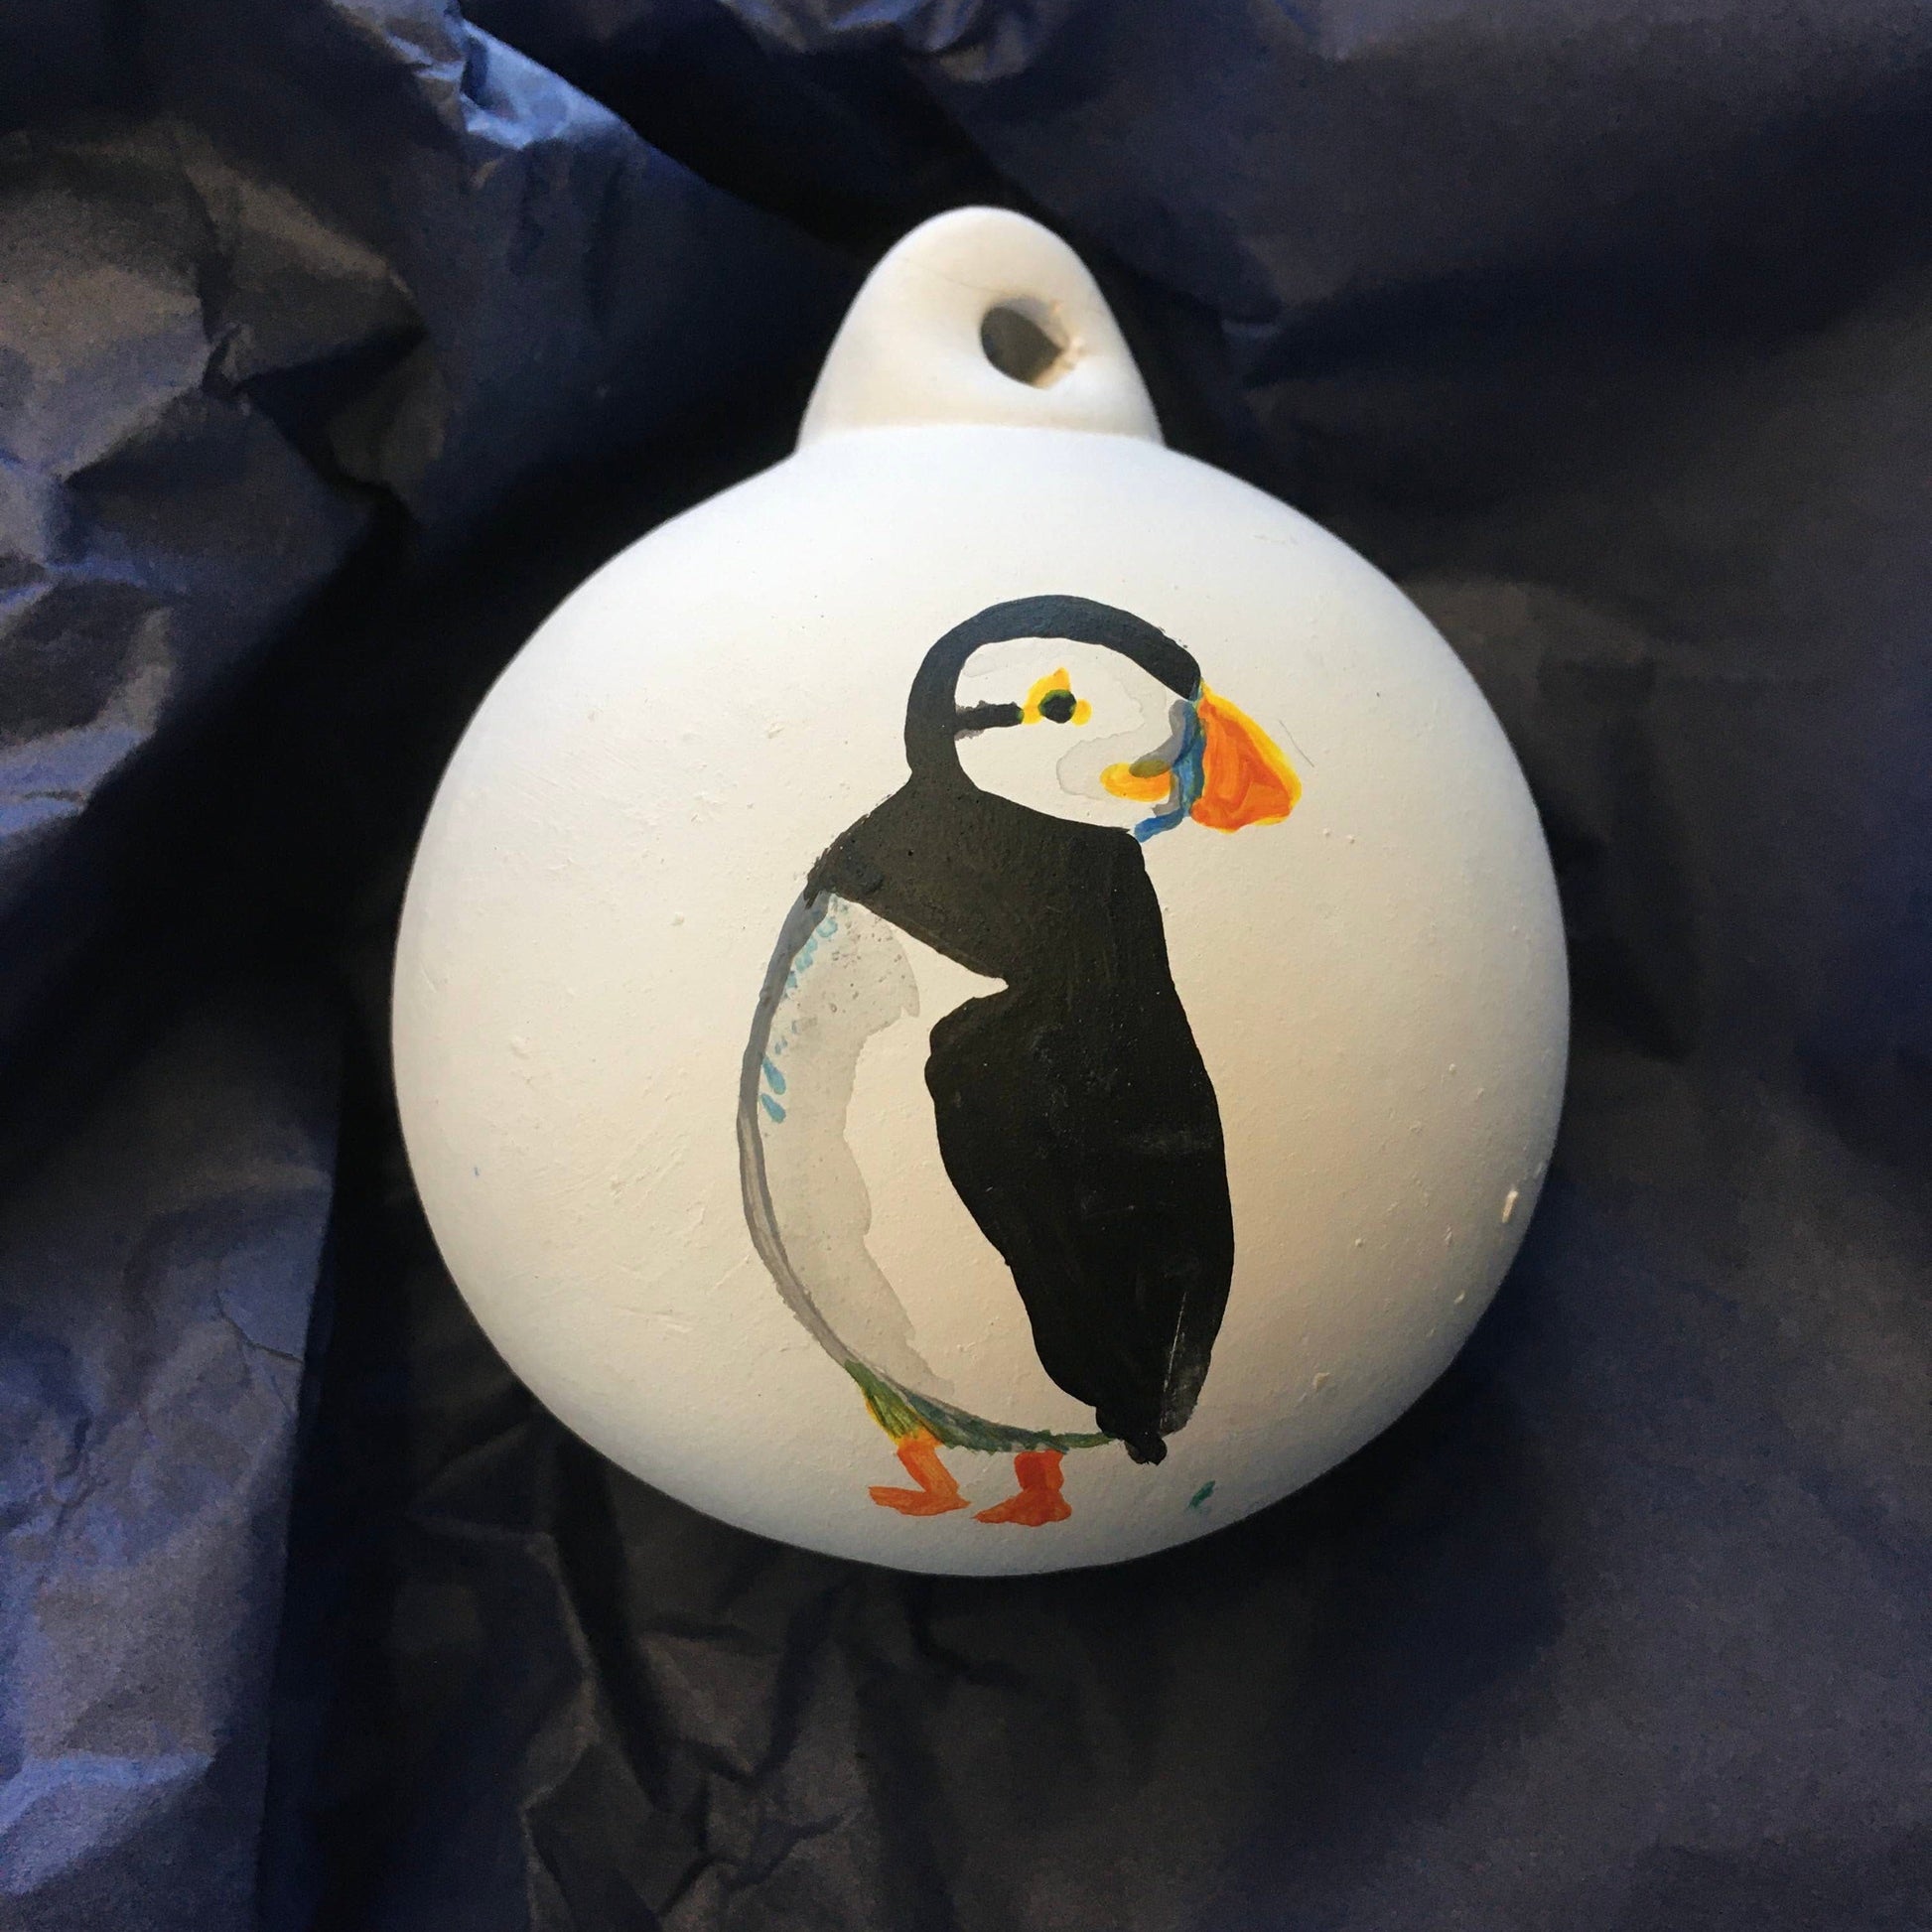 And Hope Designs Baubles Puffin ceramic Christmas baubles